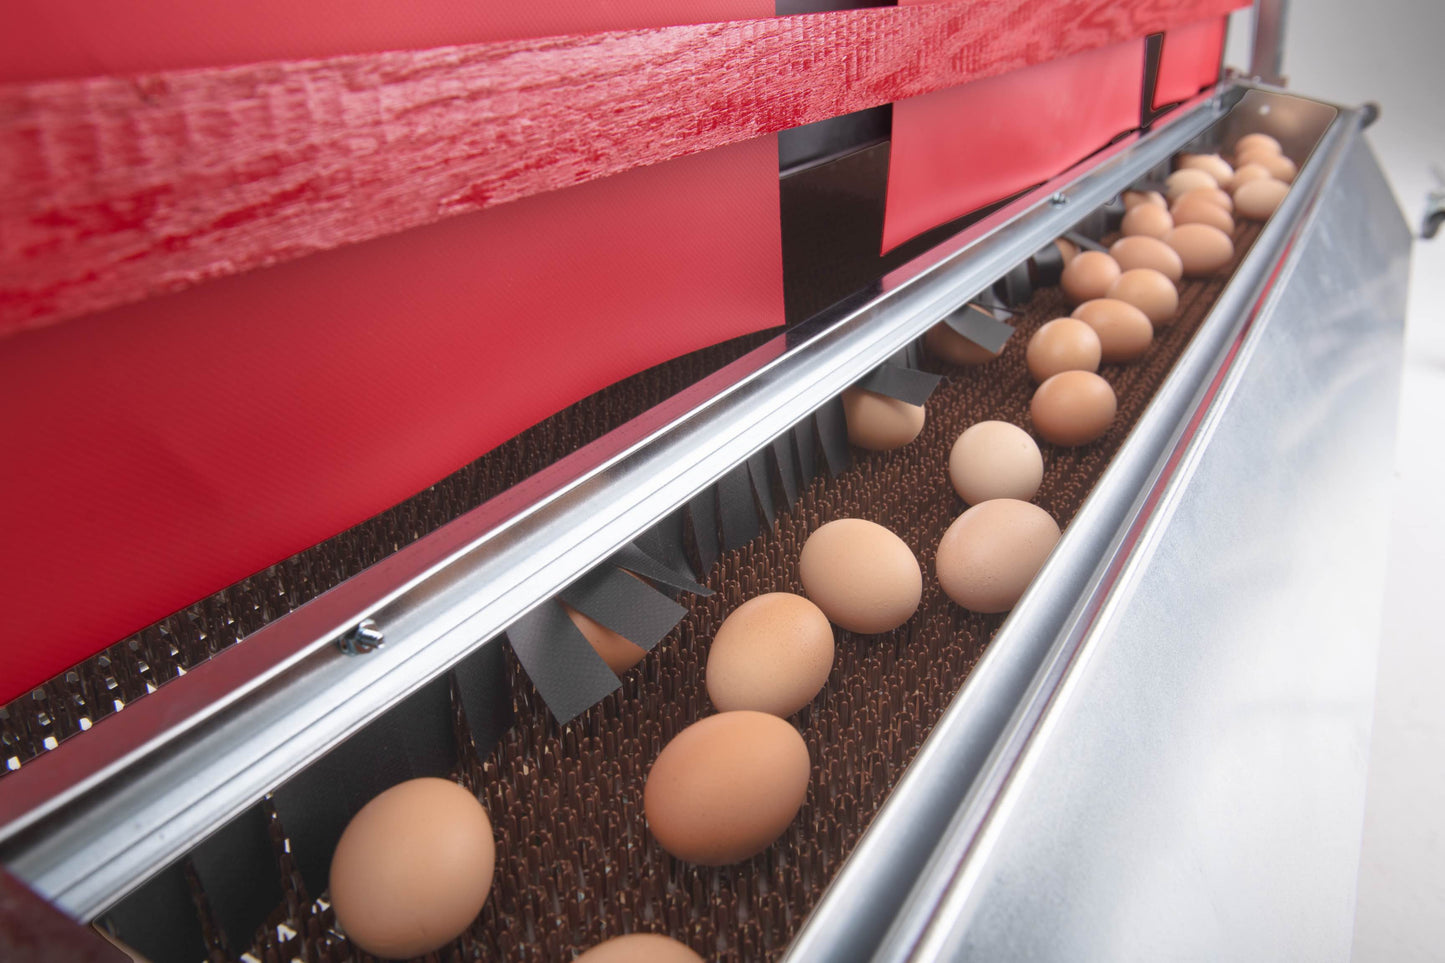 
                  
                    X-Large (72") Reversible Rollout Nest Box (Up to 75 Hens) - Ready to Ship!
                  
                